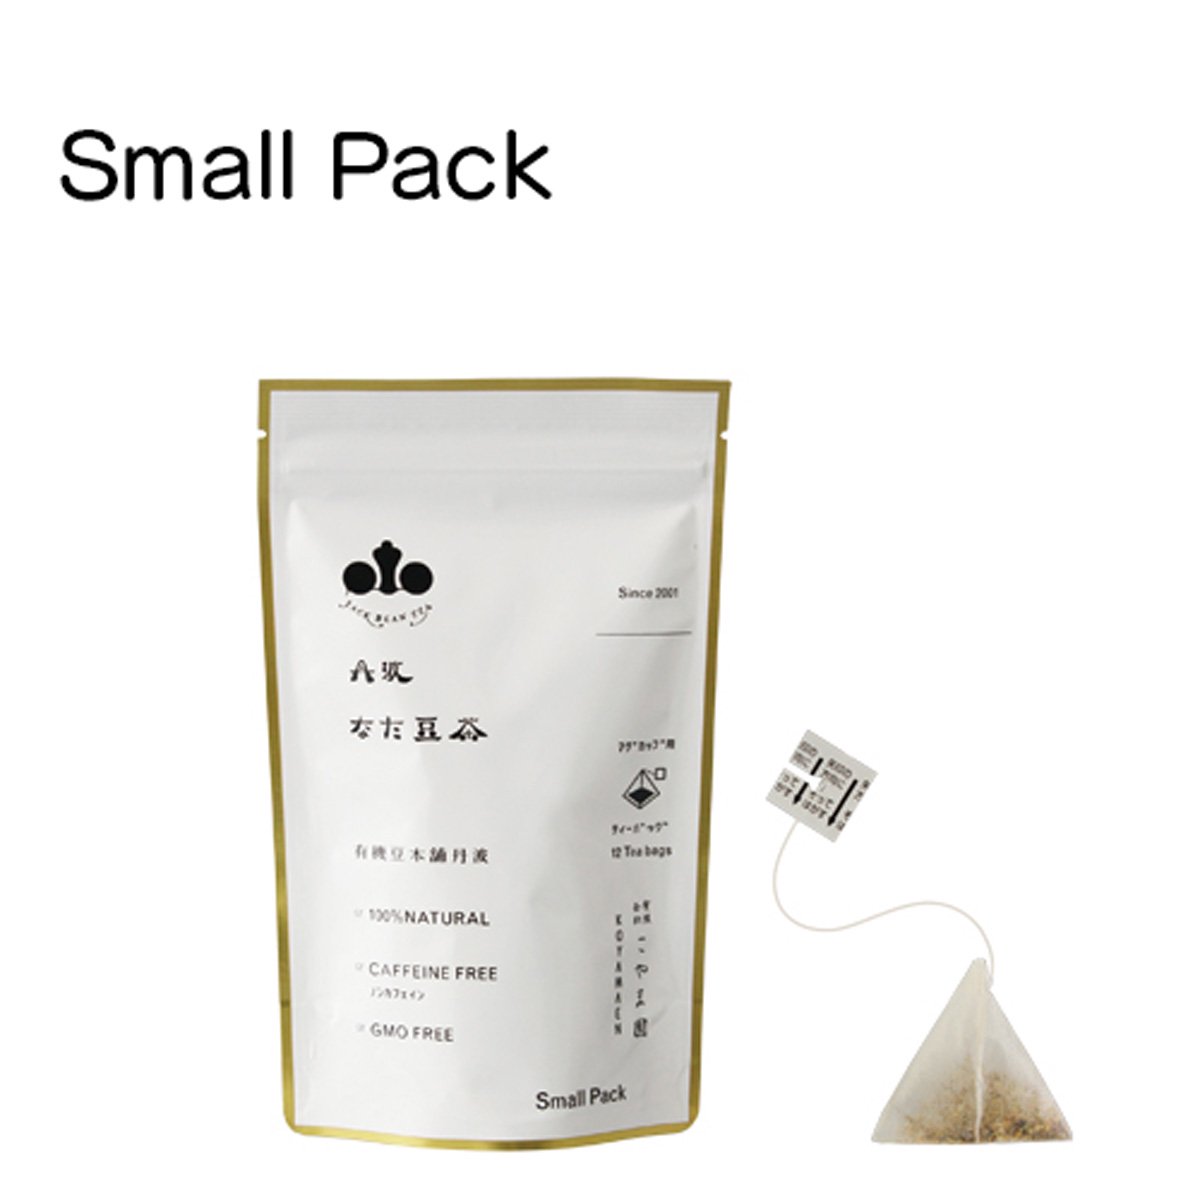 Small Pack